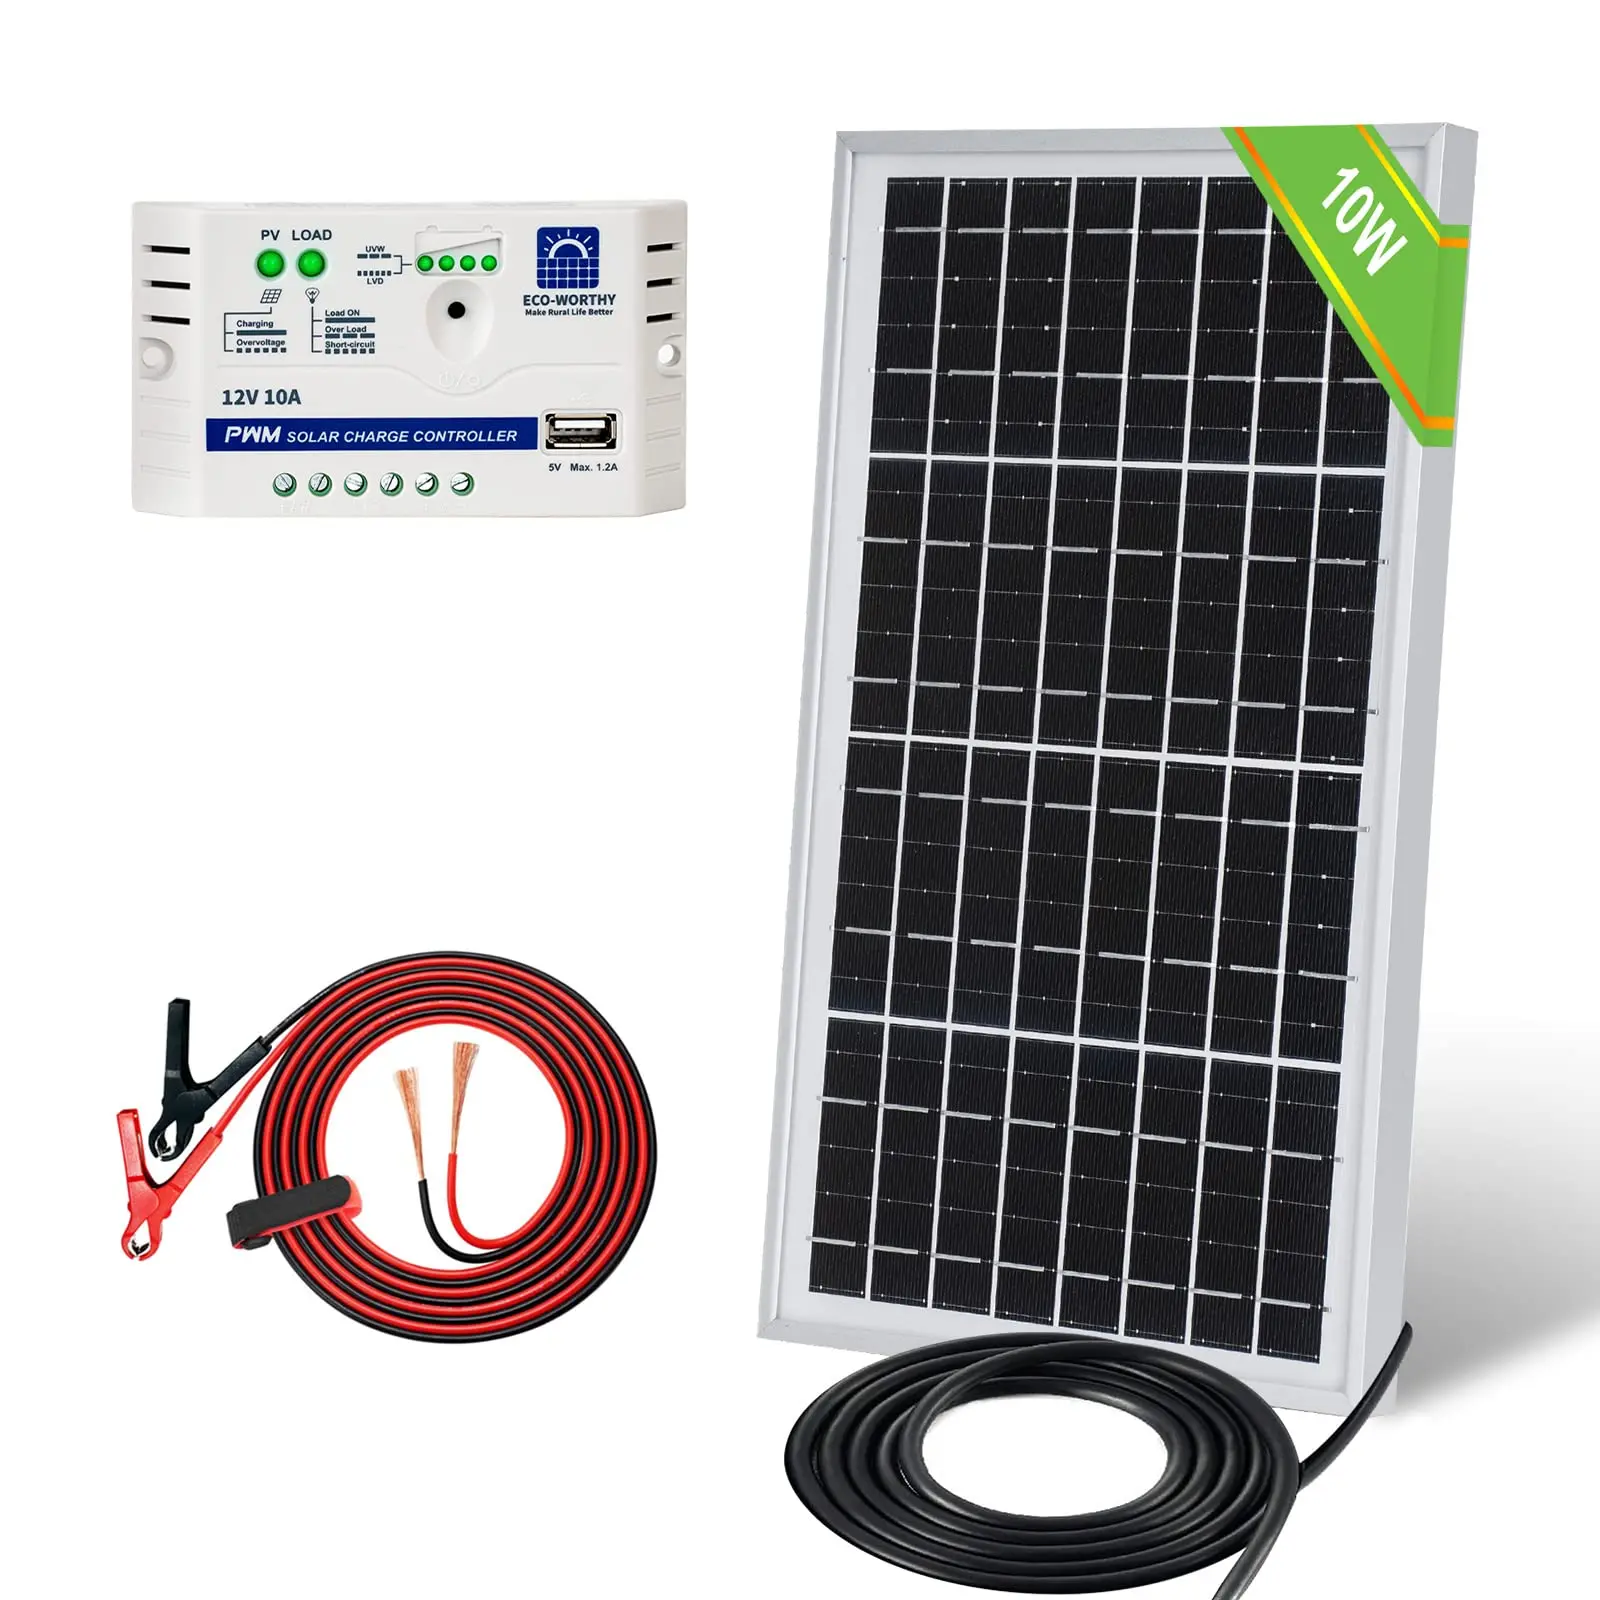 10w solar panel charge controller - What can I charge with a 10W solar panel